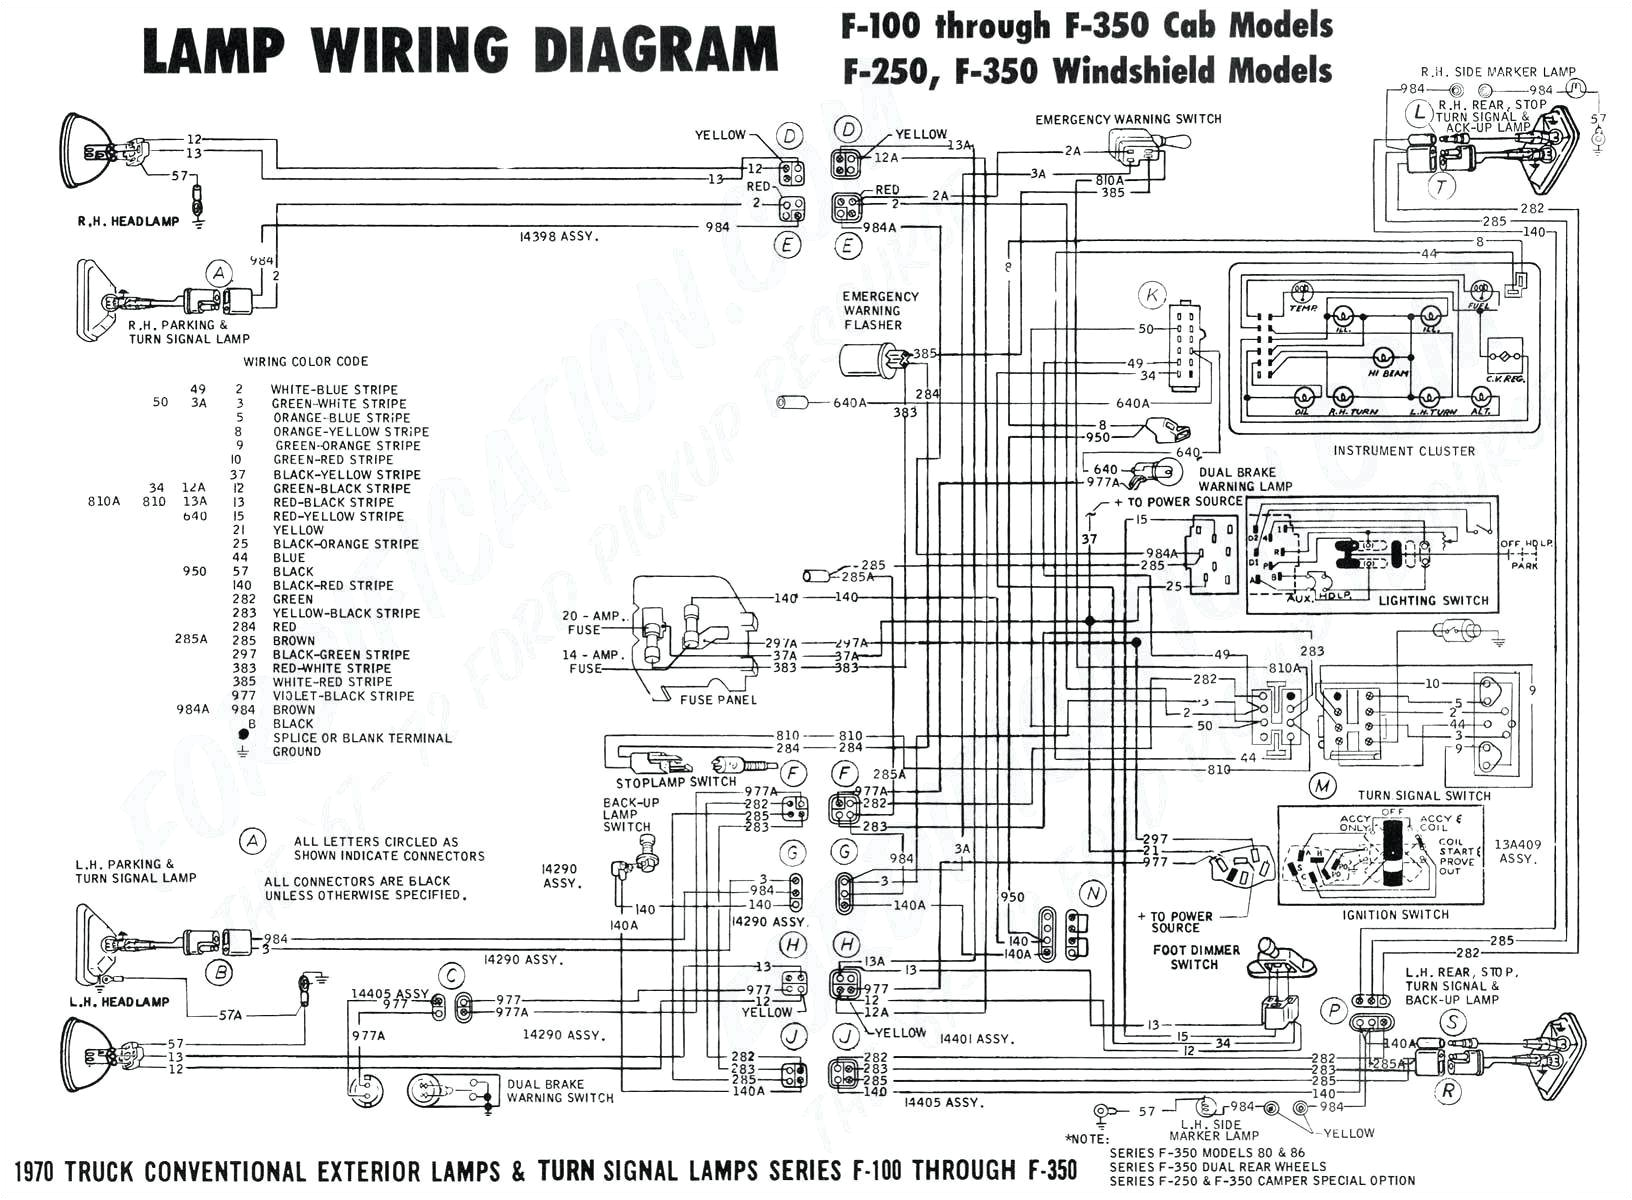 double light switch schematic wiring diagram